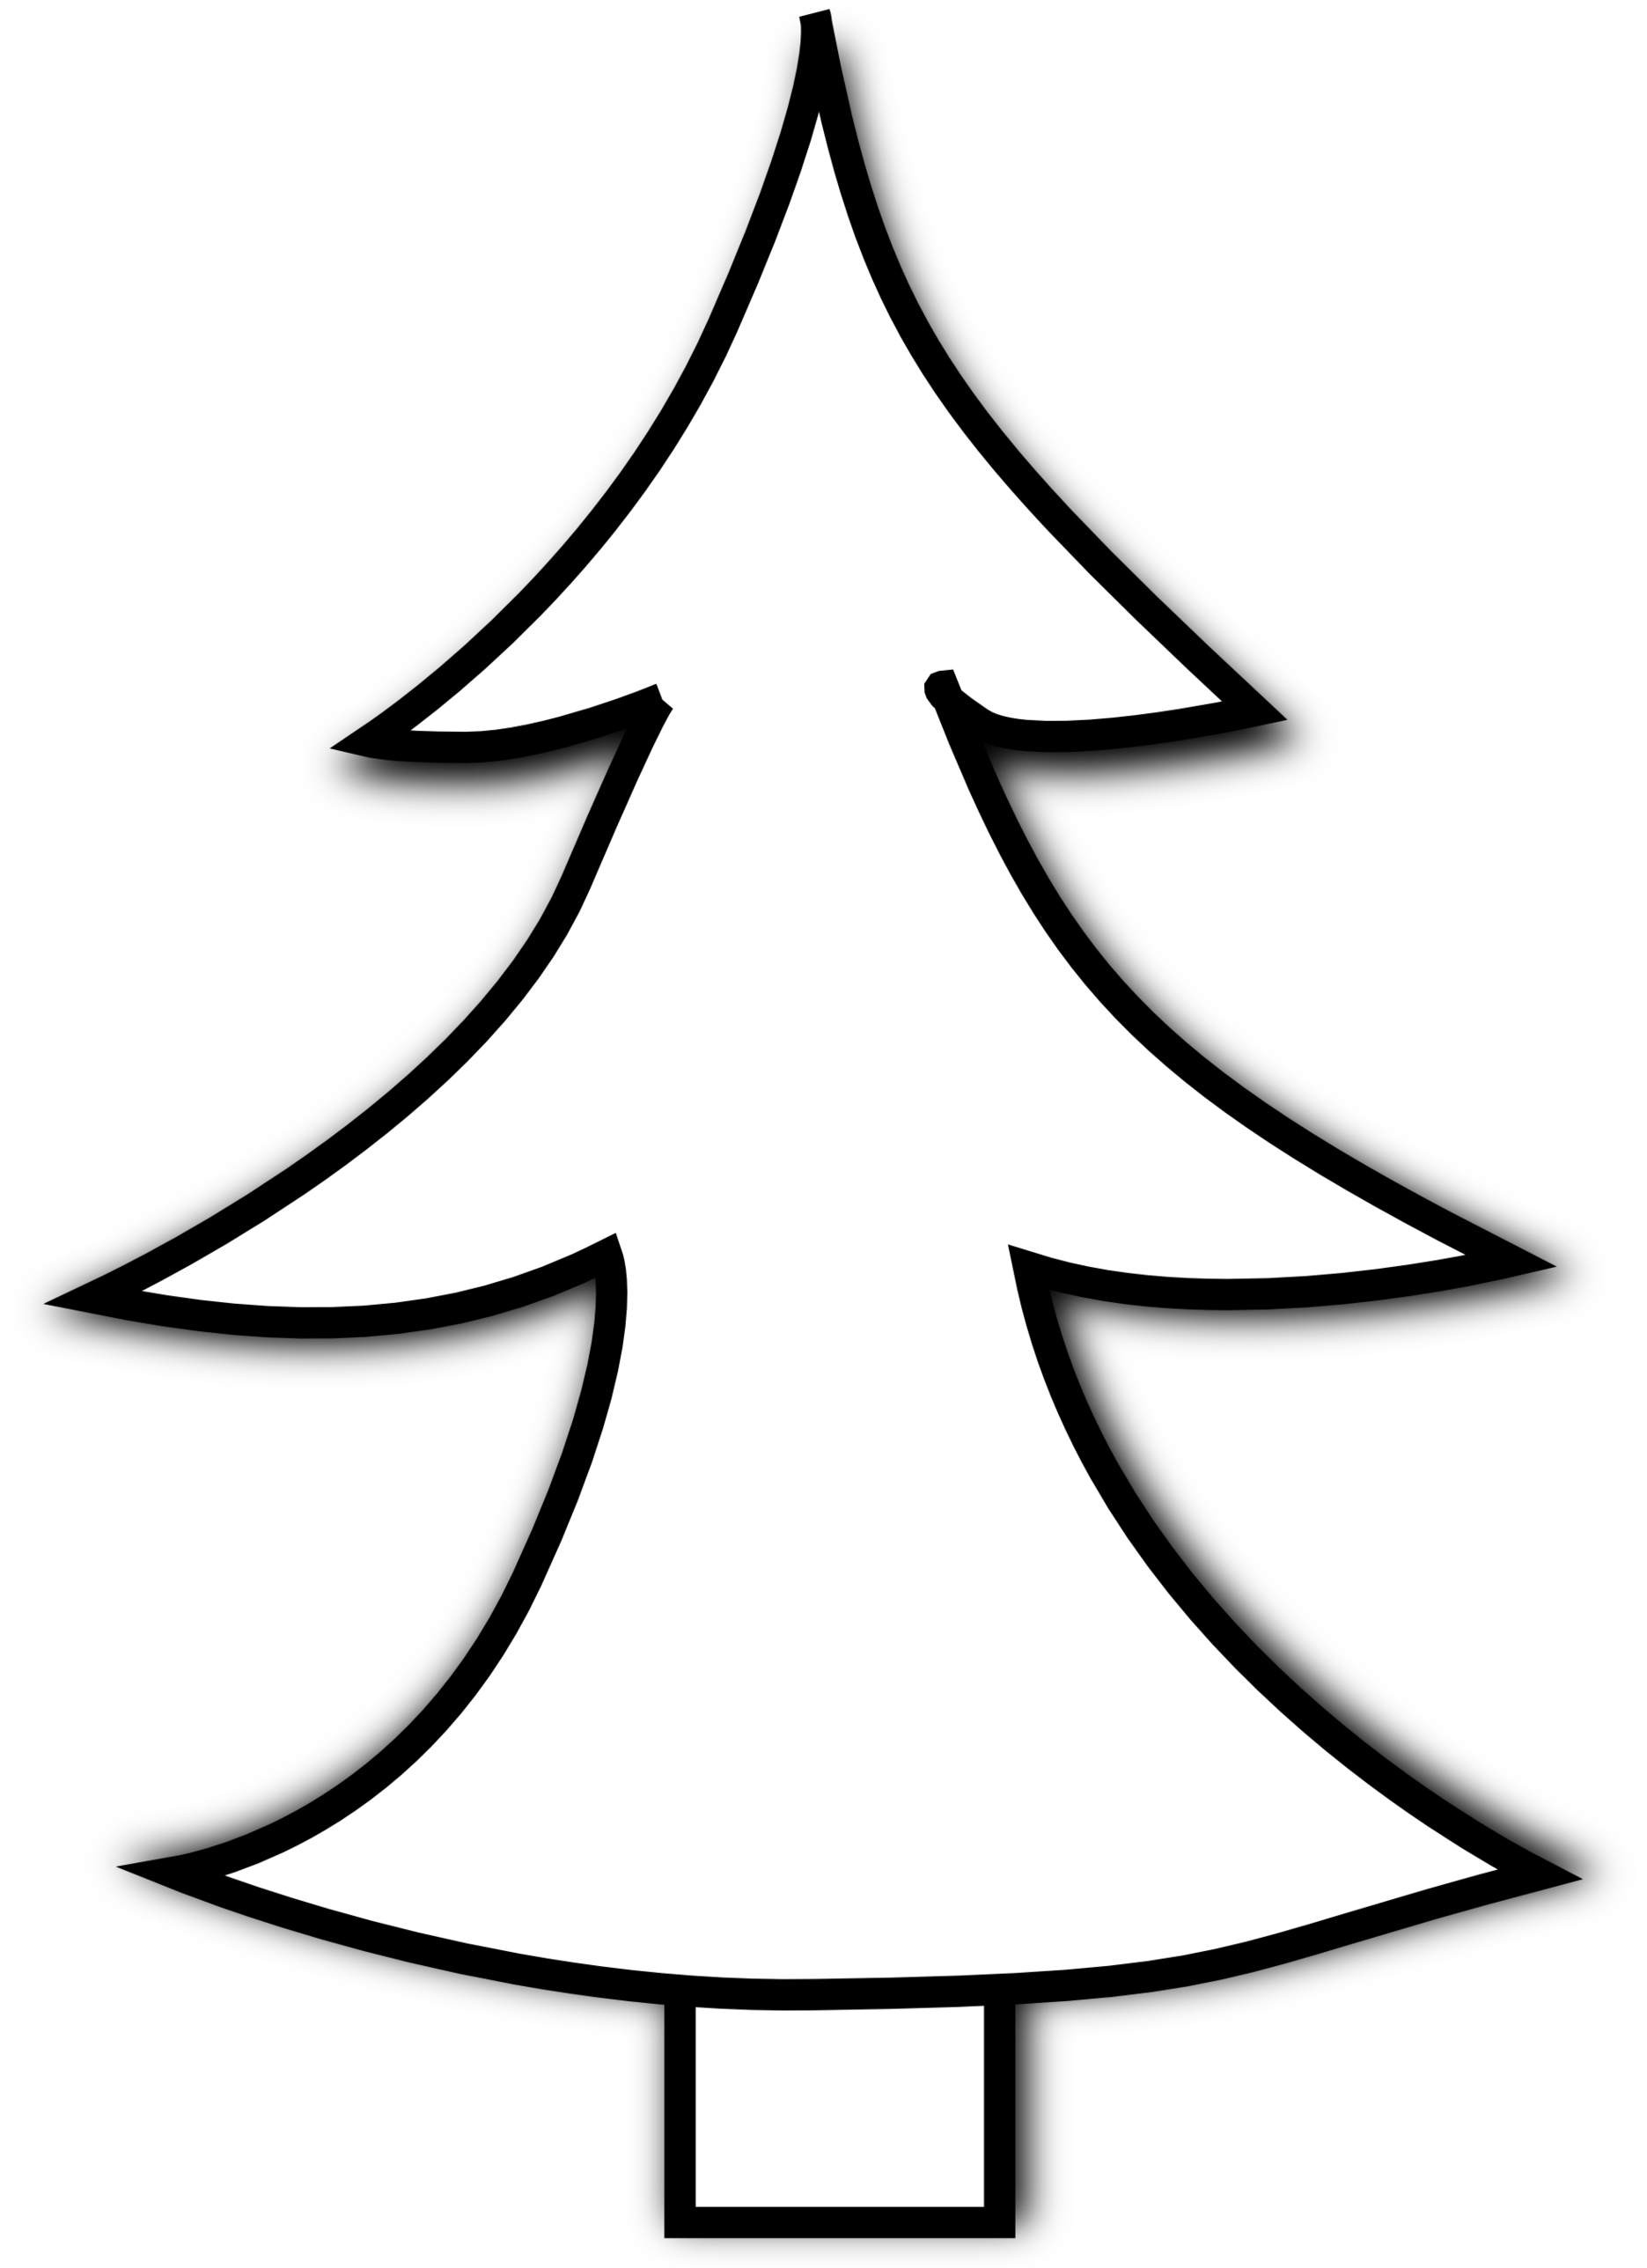 Black Tree Clipart Clipart - Free to use Clip Art Resource - ClipArt